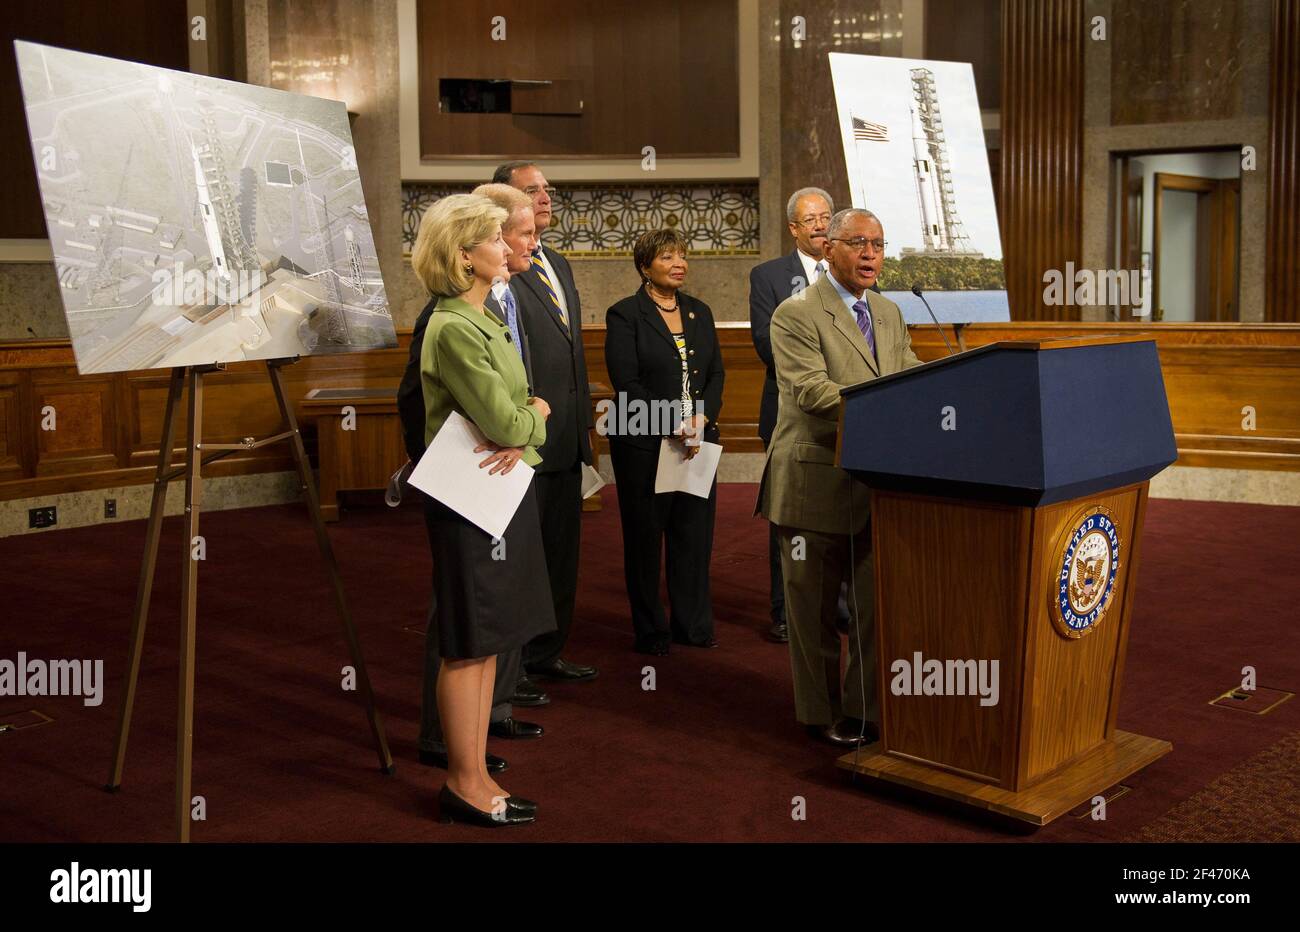 NASA Administrator Charles Bolden, at podium, is flanked by United States Senators Kay Bailey Hutchison (Republican of Texas); Bill Nelson (Democrat of Florida); John Boozeman (Republican of Arkansas); U.S. Representatives Eddie Bernice Johnson (Democrat of Texas) and Chaka Fattah (Democrat of Pennsylvania) as he speaks about the design of a new Space Launch System during a press conference, Wednesday, September 14, 2011, at the Dirksen Senate Office Building on Capitol Hill in Washington. The new system will take the agency's astronauts farther into space than ever before, create high-quality Stock Photo